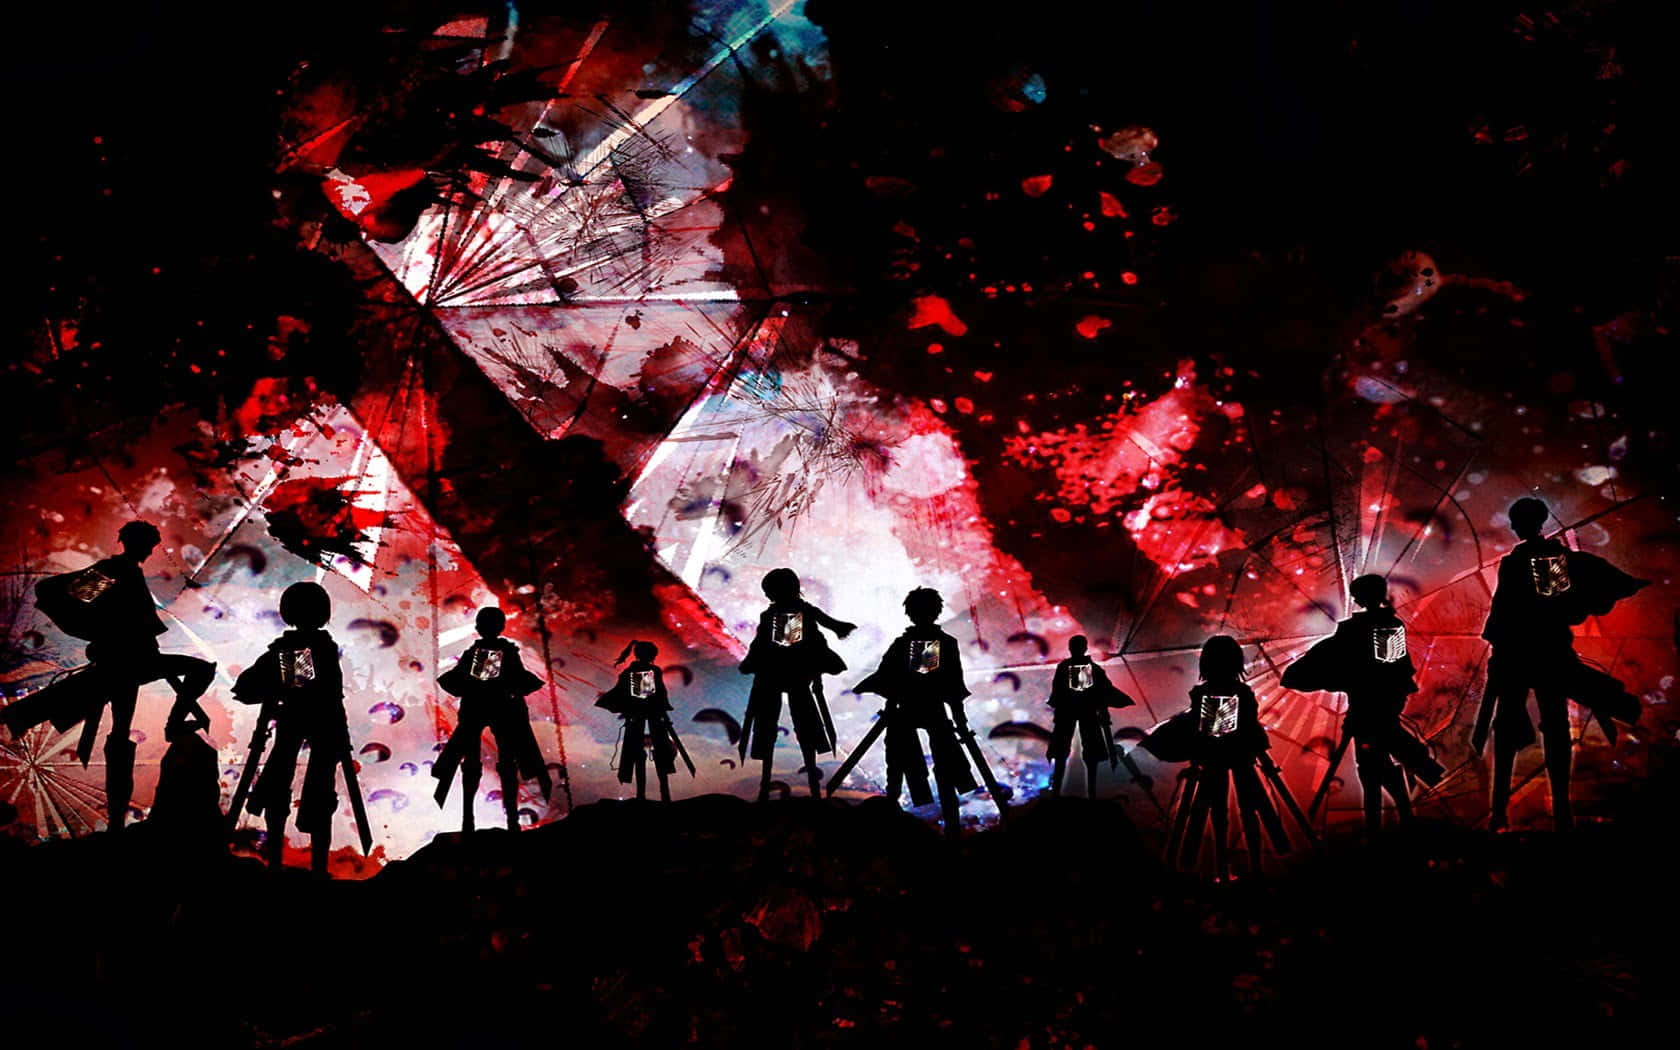 Attack On Titan Poster - Feel the Power!" Wallpaper